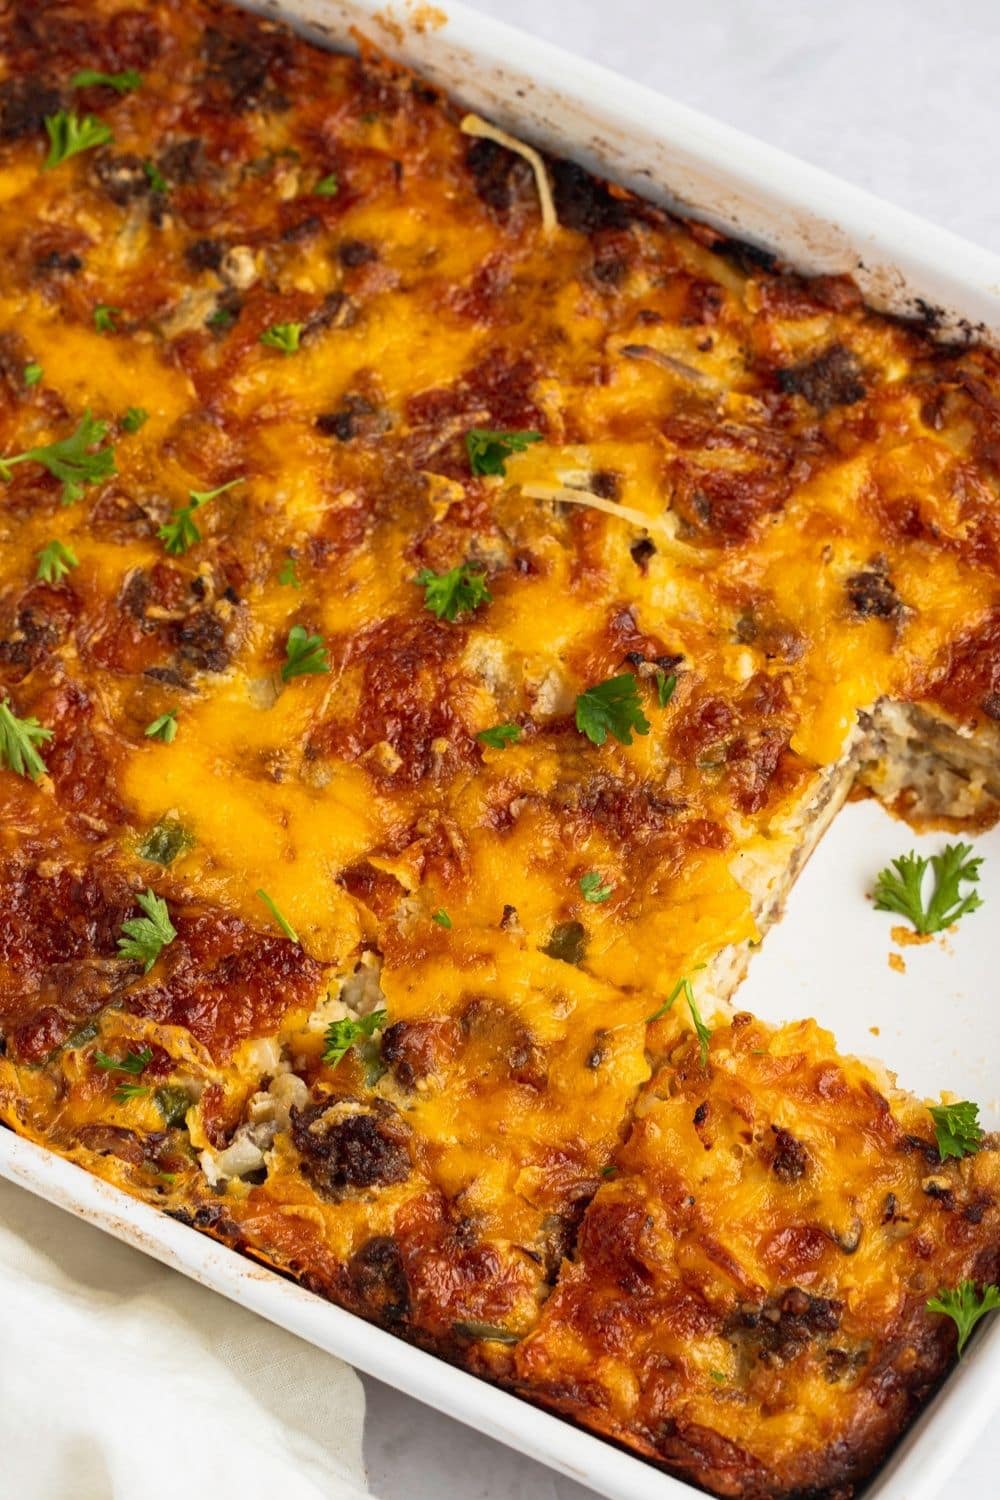 Breakfast Casserole with Pork Sausage, Cheese and Vegetables